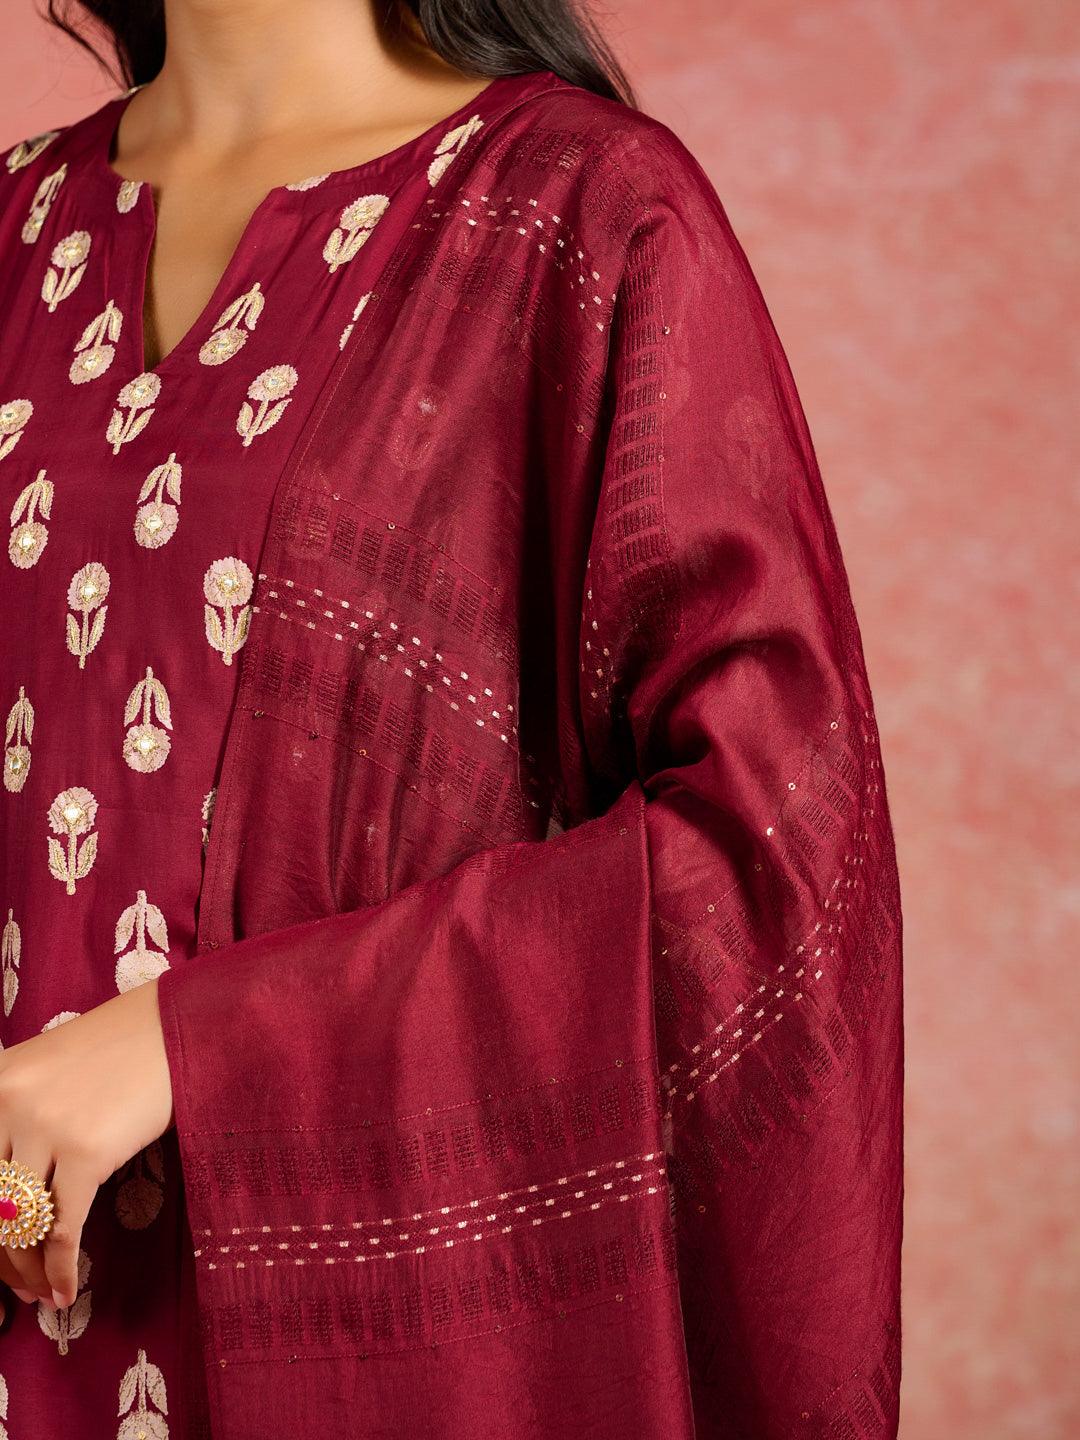 Maroon Printed Silk Blend Straight Suit With Dupatta